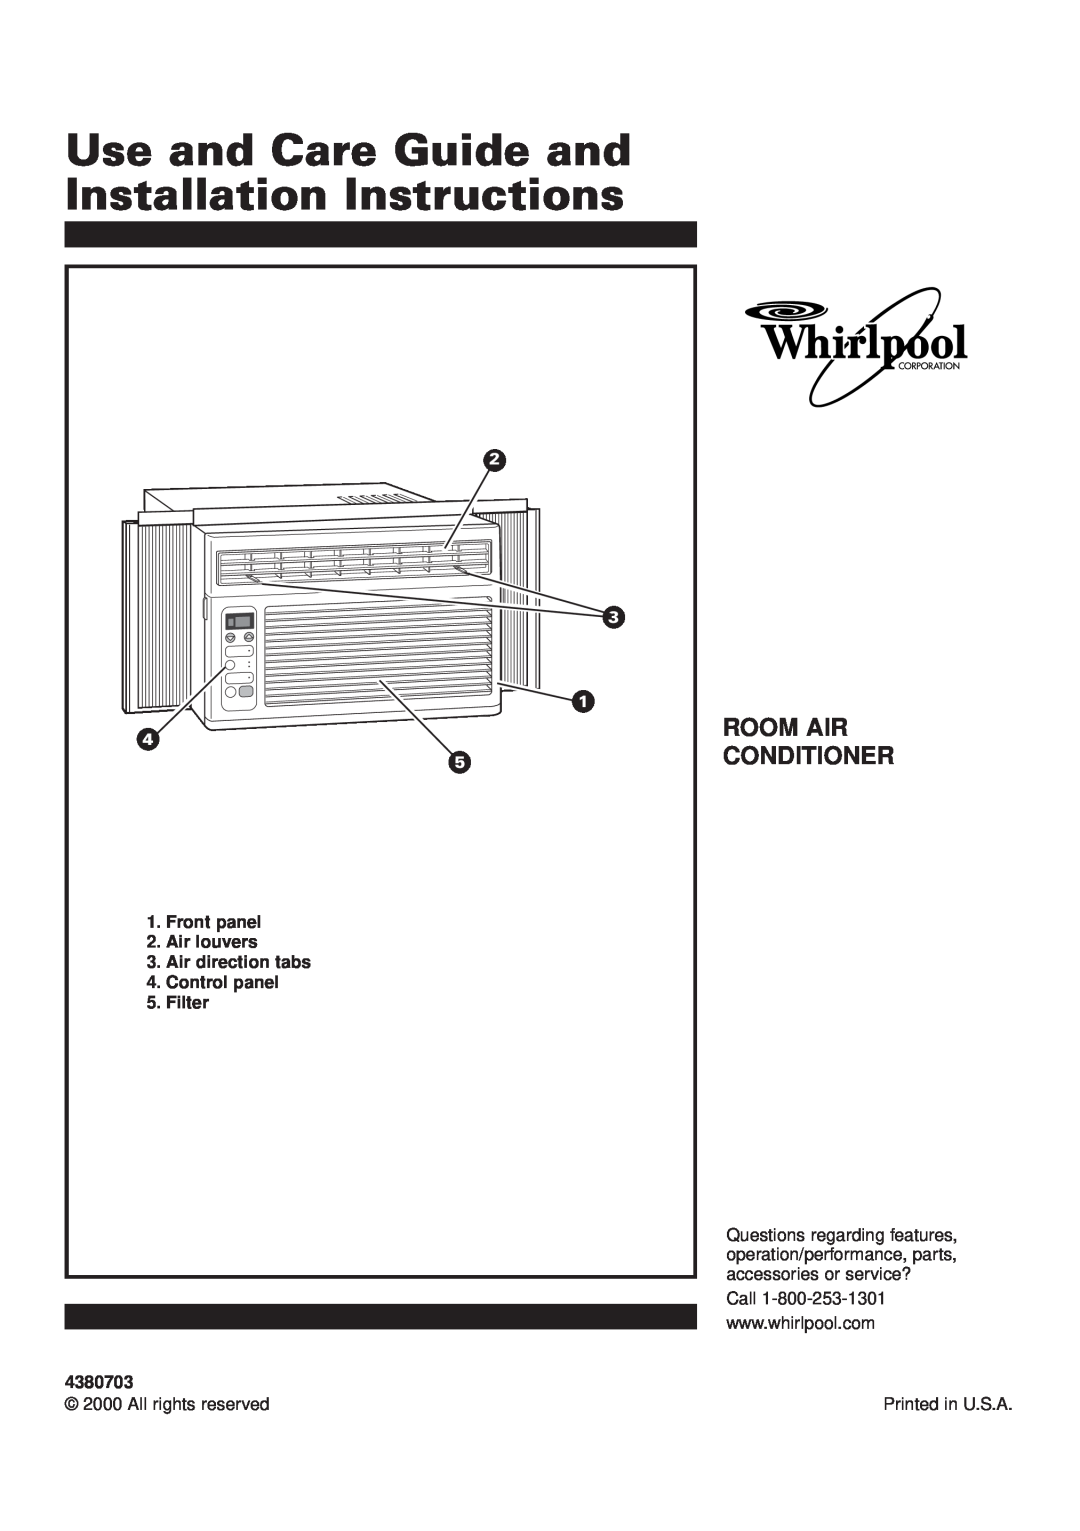 Whirlpool ACQ052PK0 installation instructions Use and Care Guide and Installation Instructions, Room Air Conditioner 